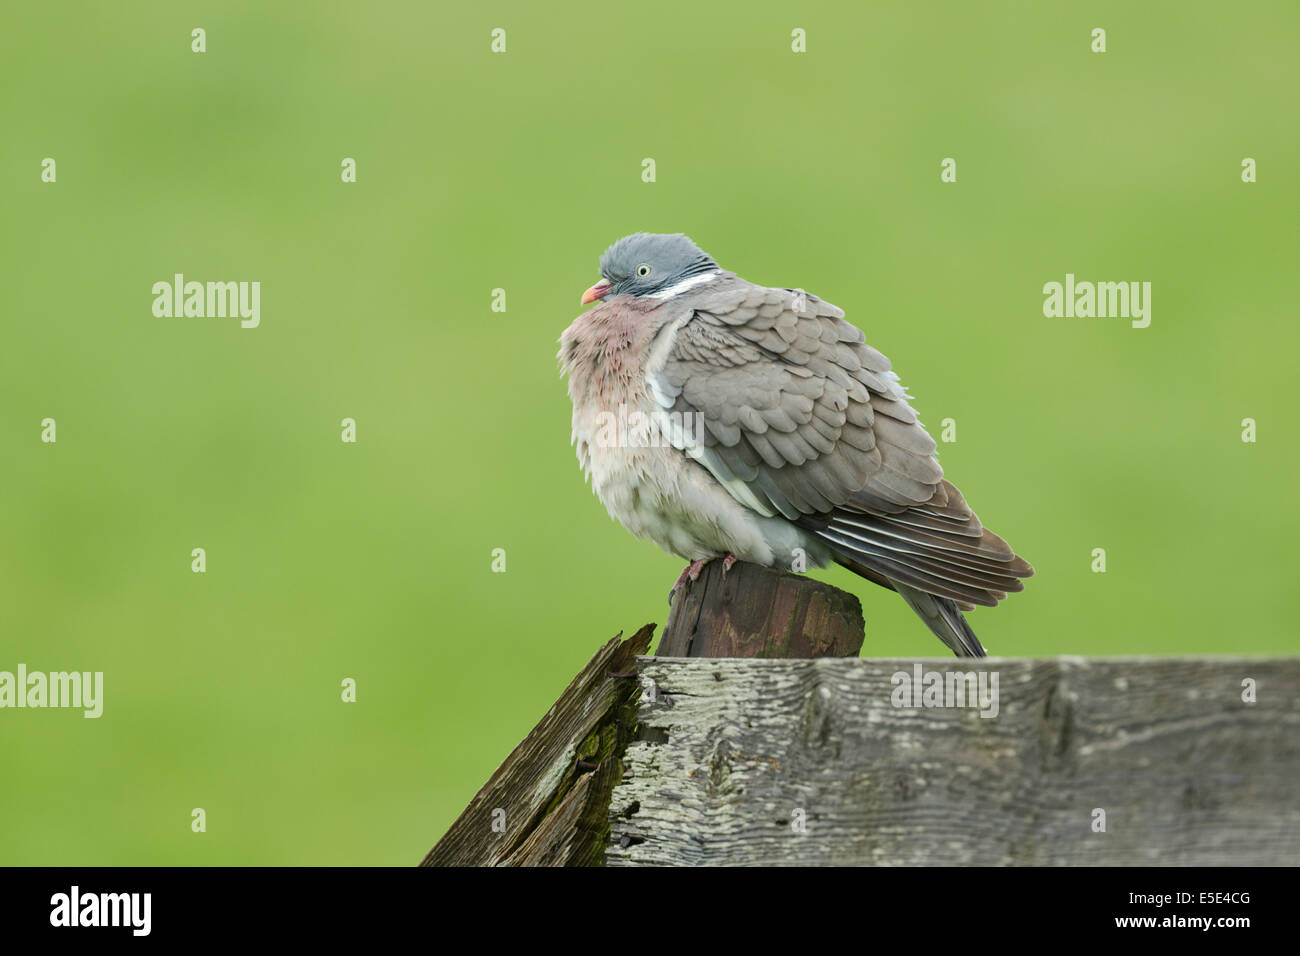 Woodpigeon, Columba palunbus, sitting on a wooden fence with its feathers ruffled Stock Photo